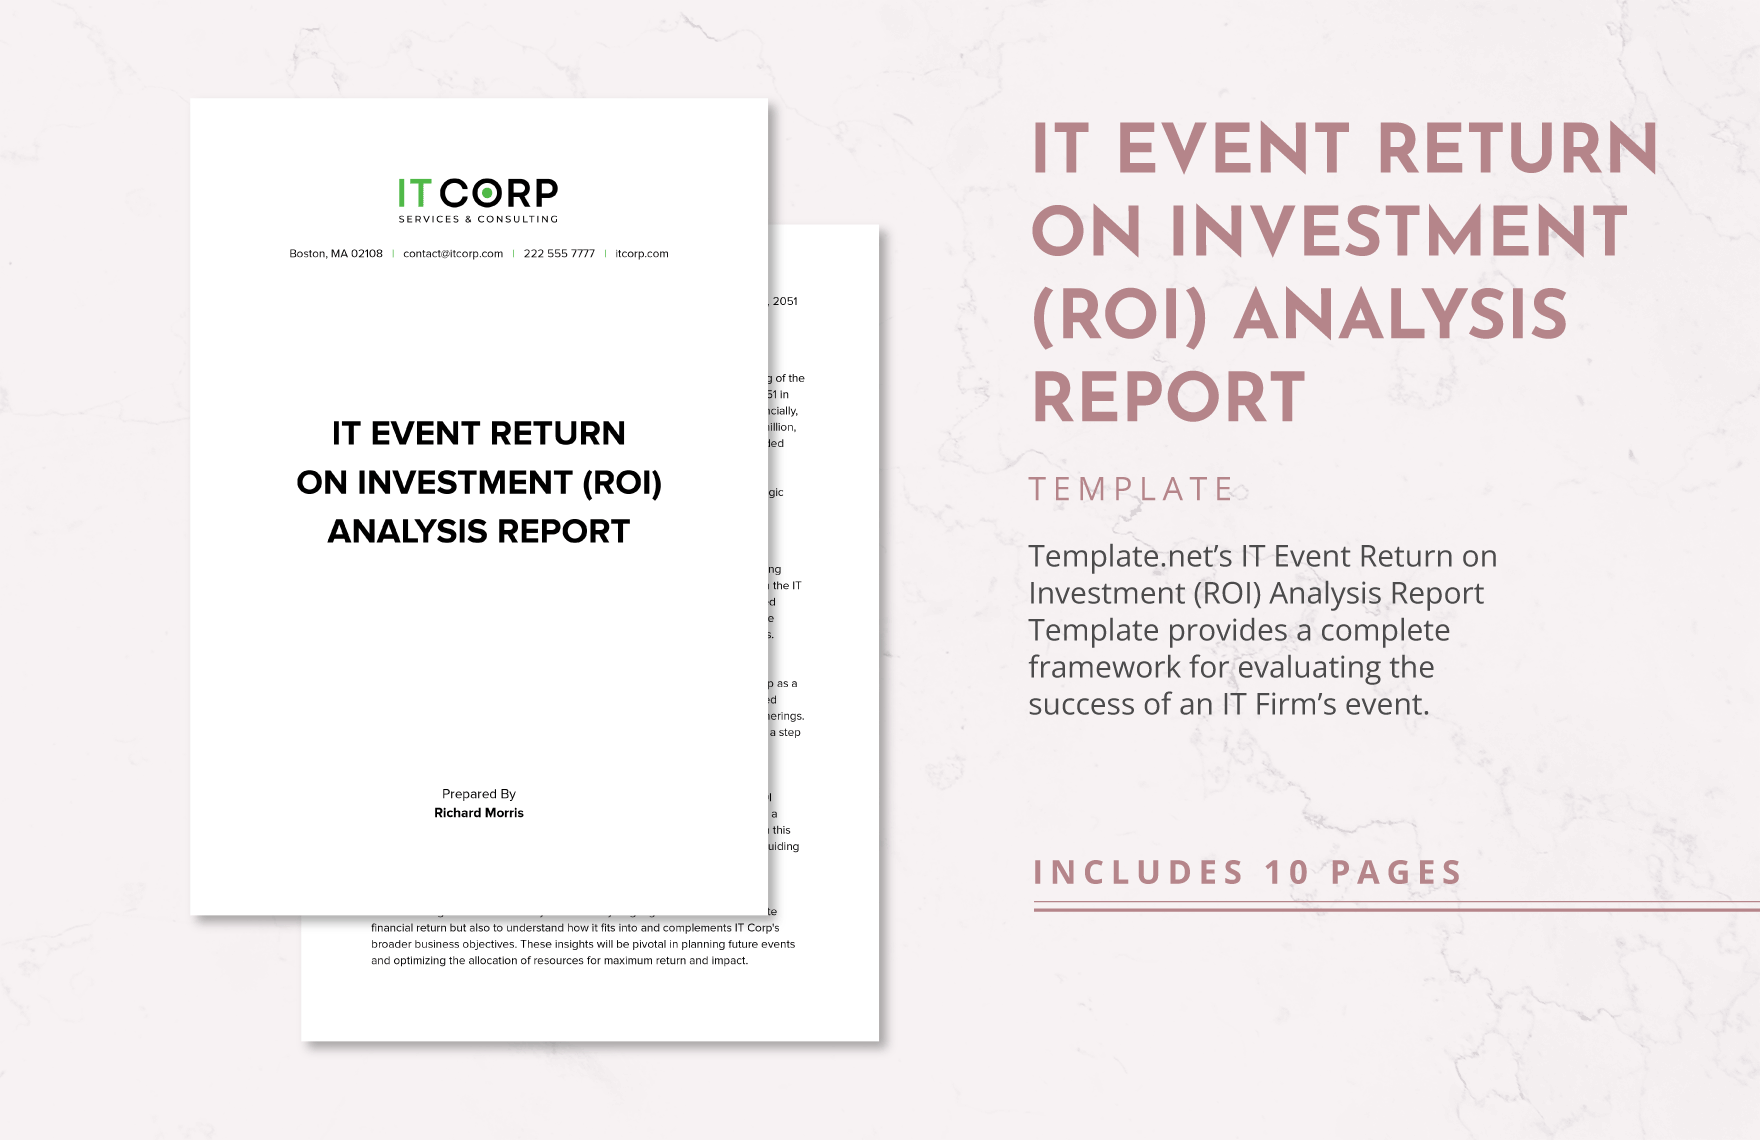 IT Event Return on Investment (ROI) Analysis Report Template in Word, Google Docs, PDF